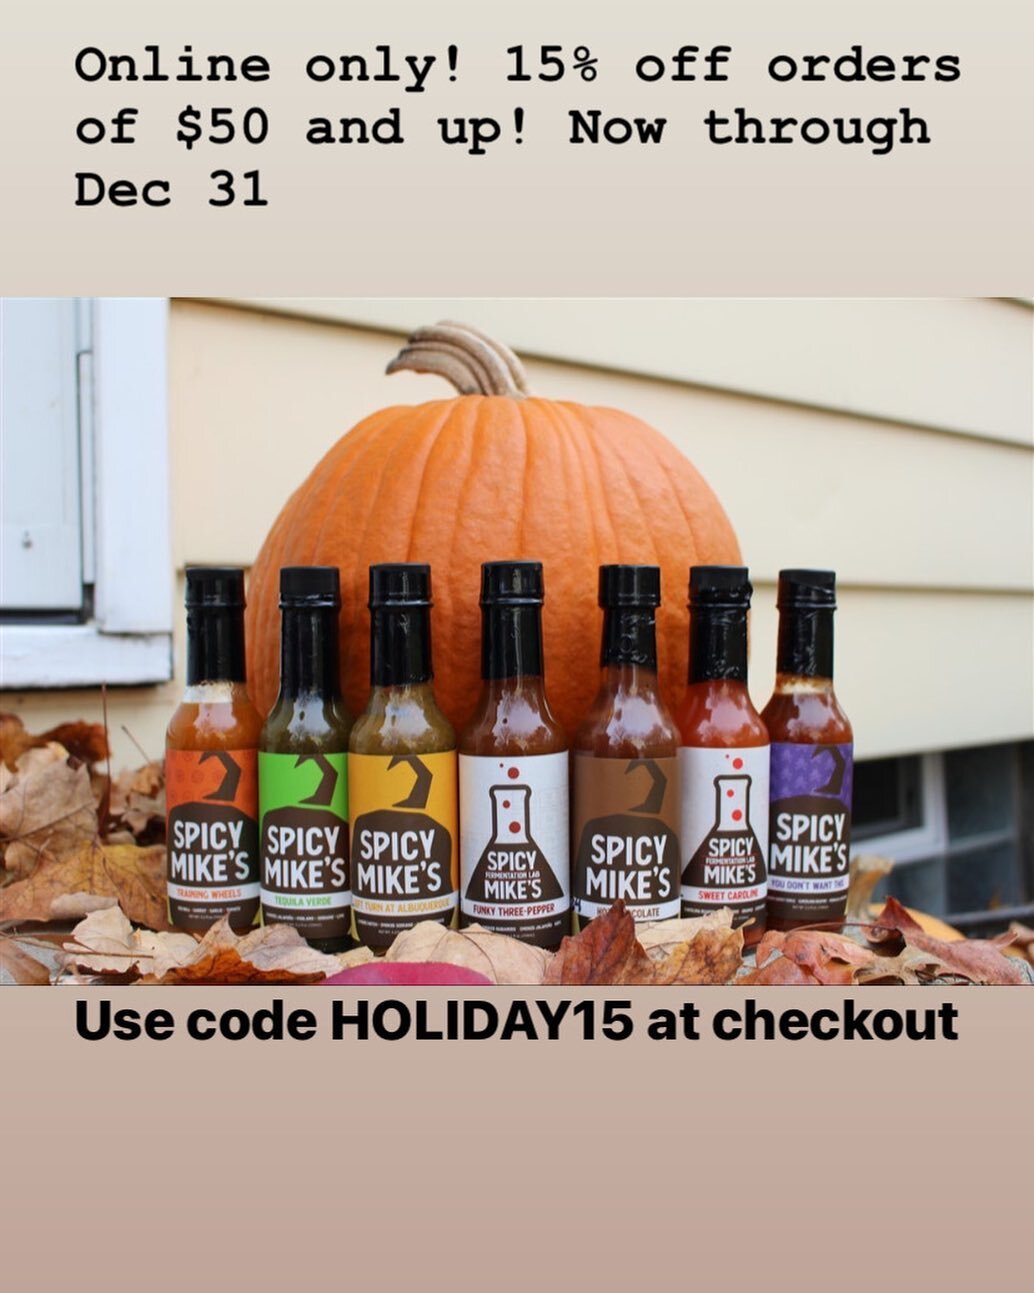 Our first ever website sale! Code HOLIDAY15. Once per customer, going on through Dec 31! 
Also, there is now a waitlist option on the site for the sauces we are sold out of so you can be the first to know when things are back in. 

#sale #smallbusine